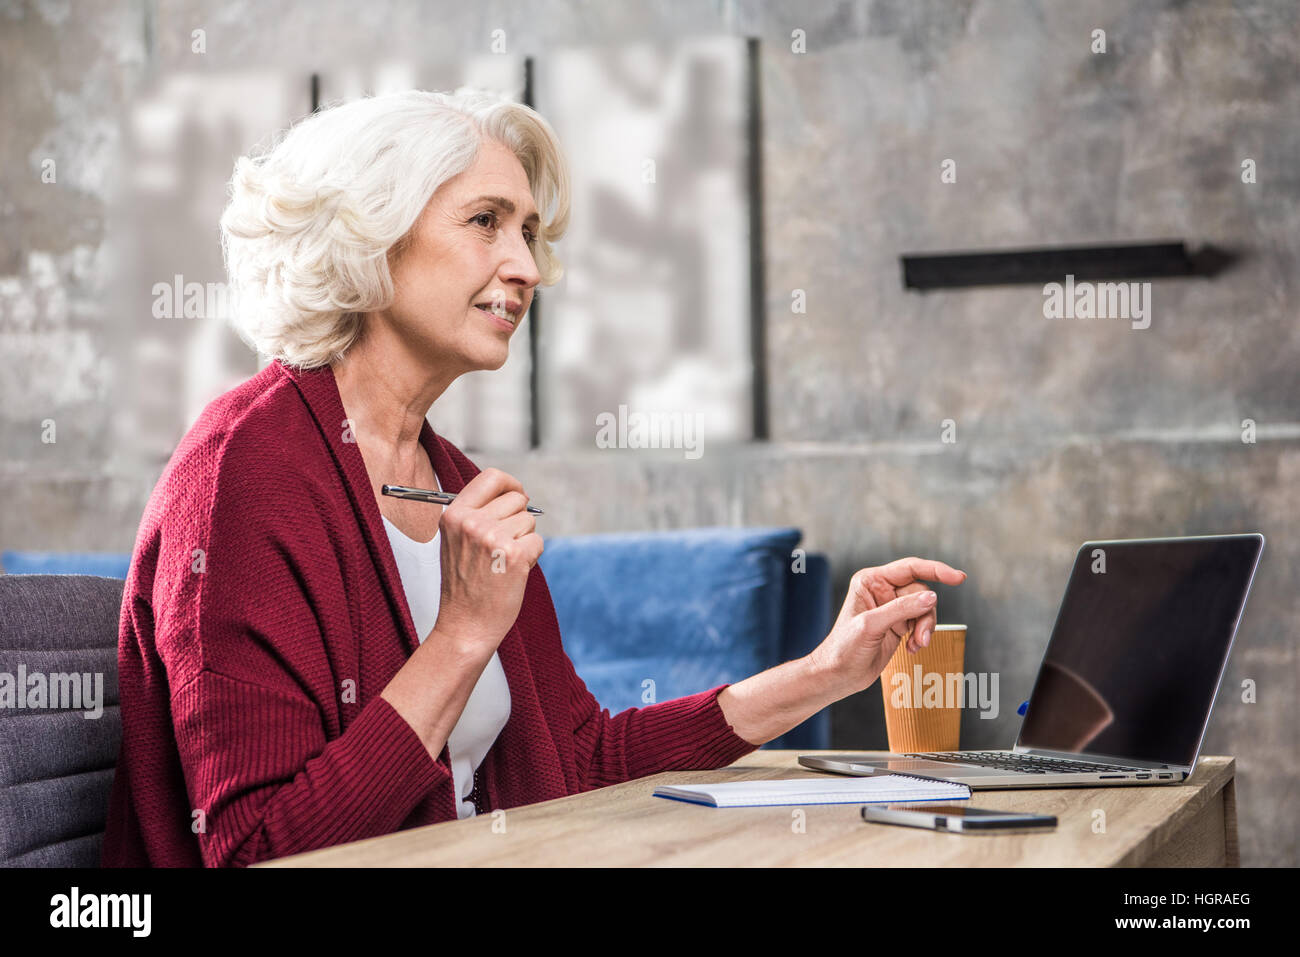 Attractive smiling senior woman freelancer holding pen sitting at the table with laptop Stock Photo